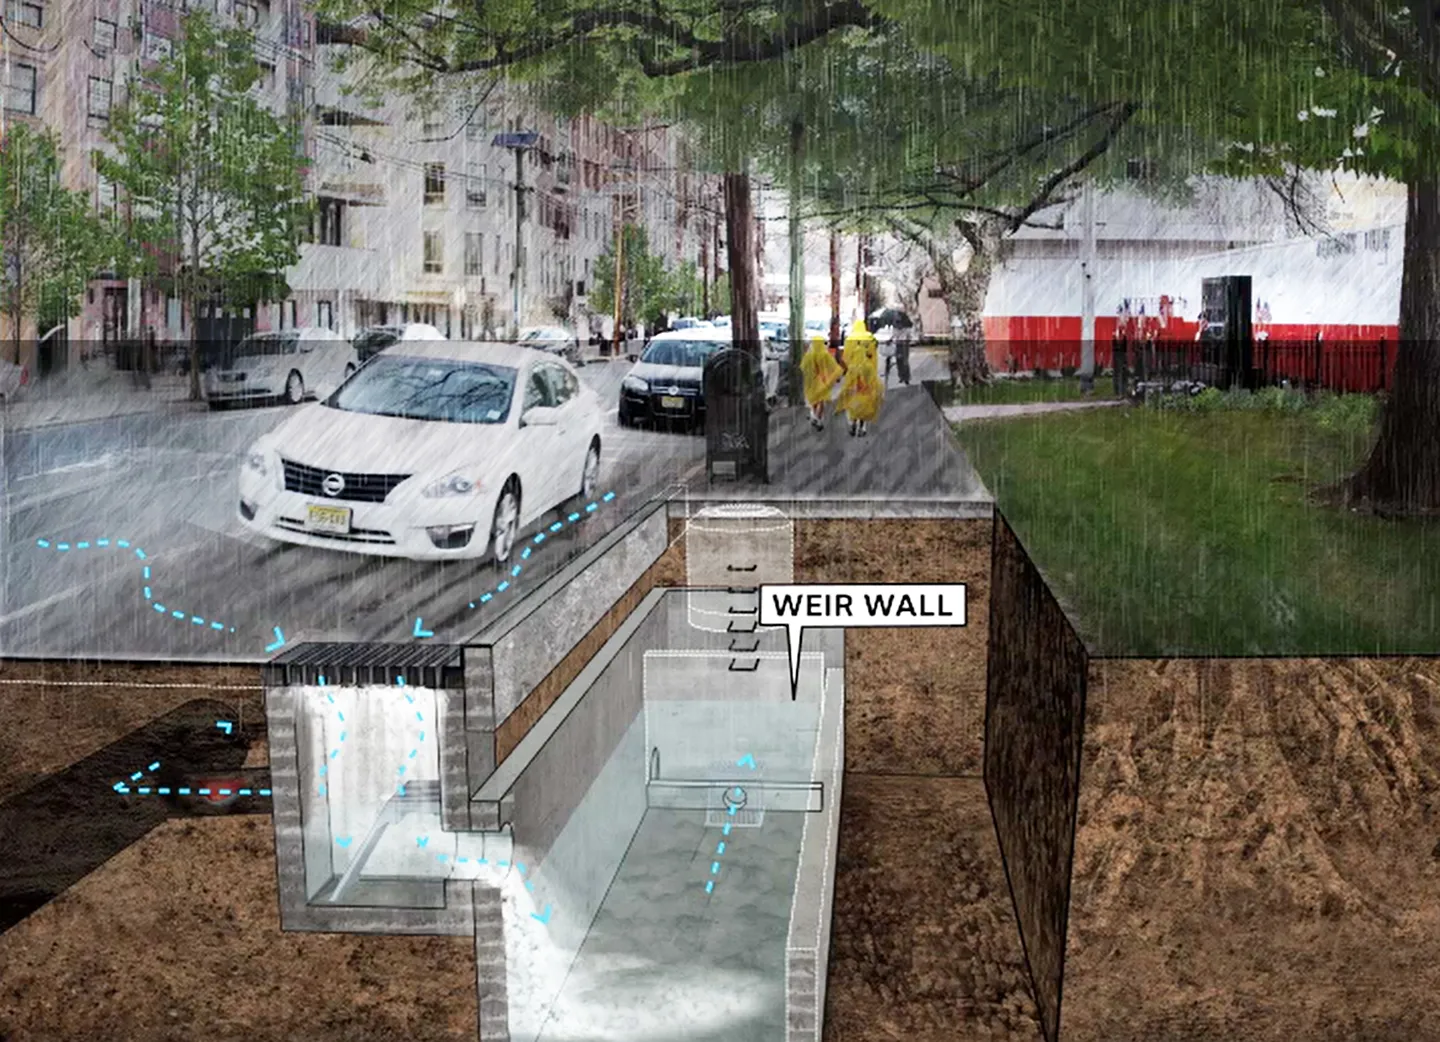 Green and gray infrastructure solution integrated within public right-of-way to reduce flooding from rainfall events